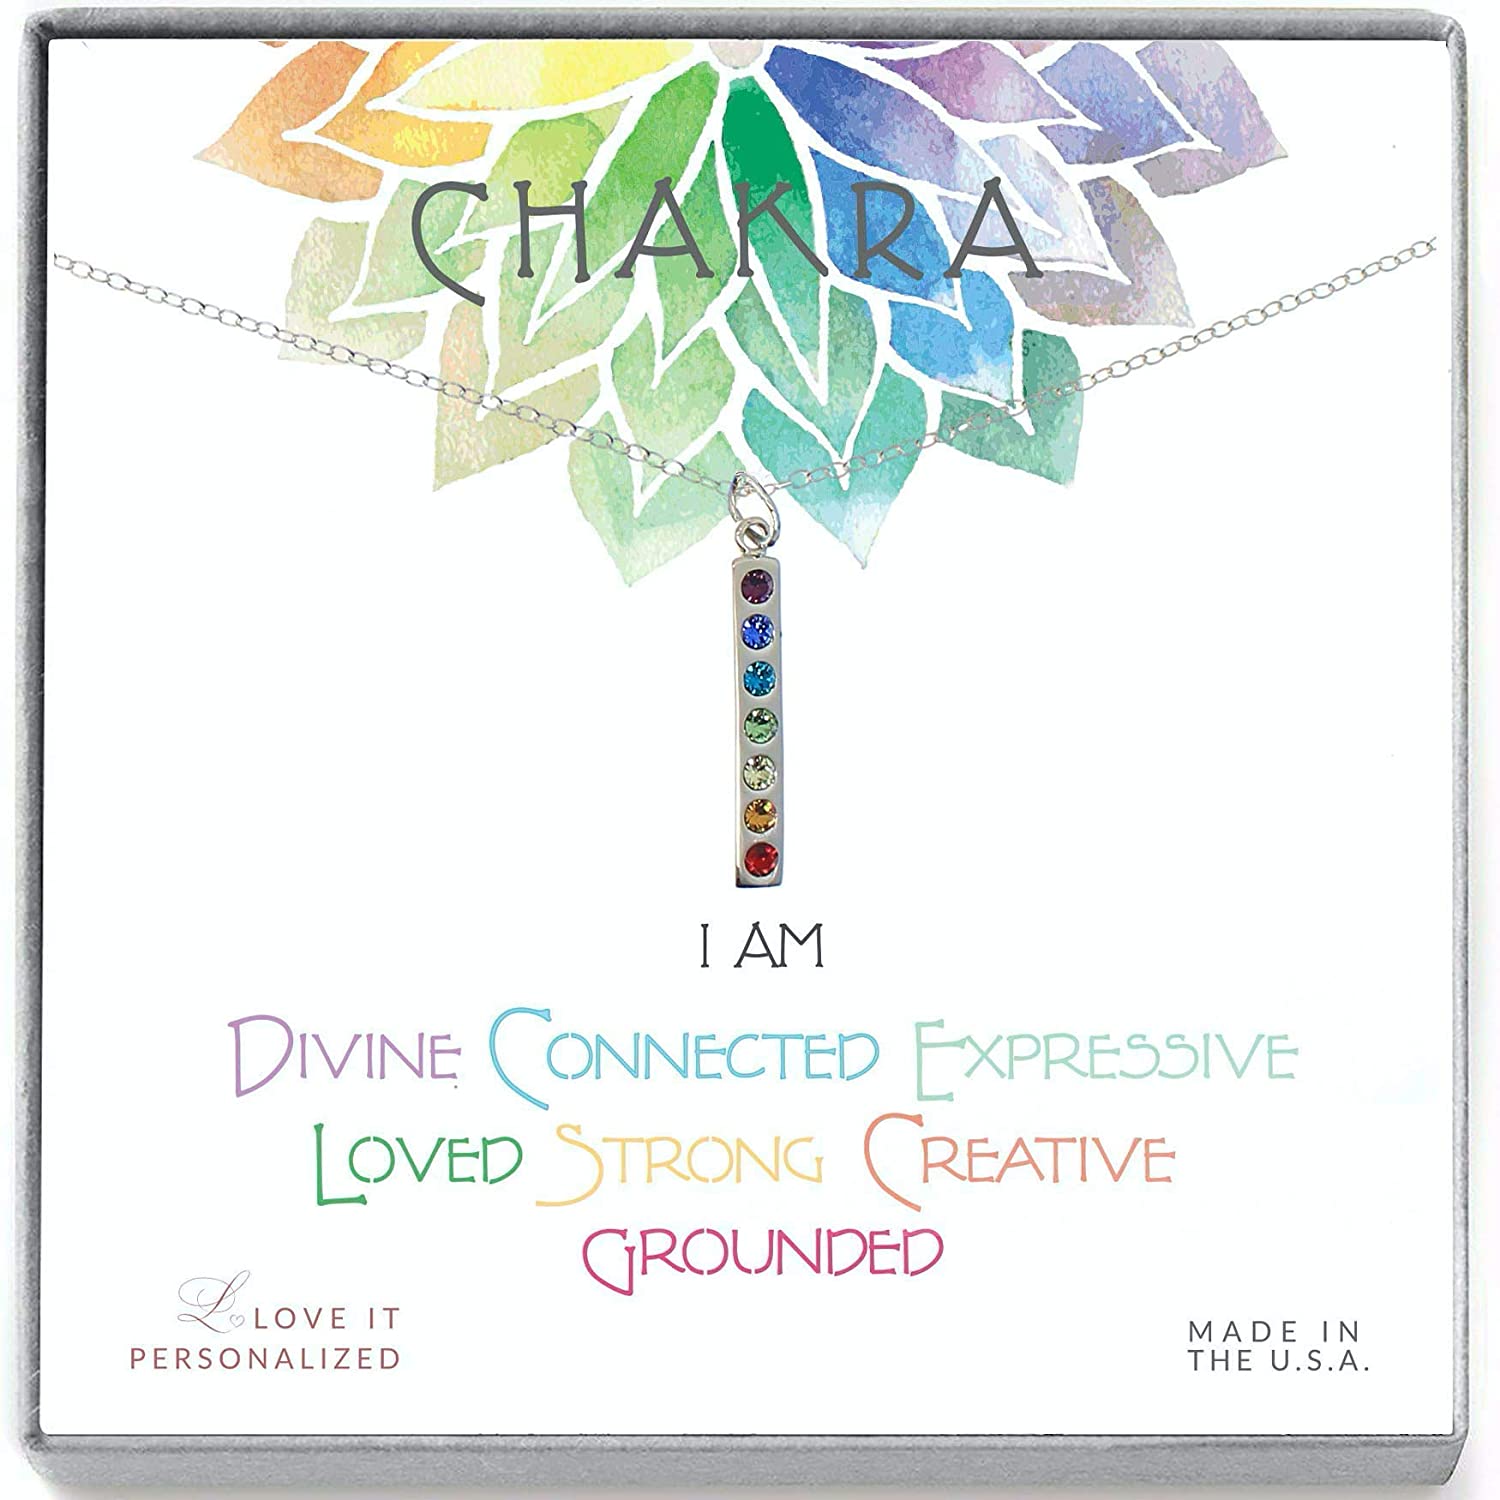 Chakra Rainbow Necklace with Crystals - Love It Personalized